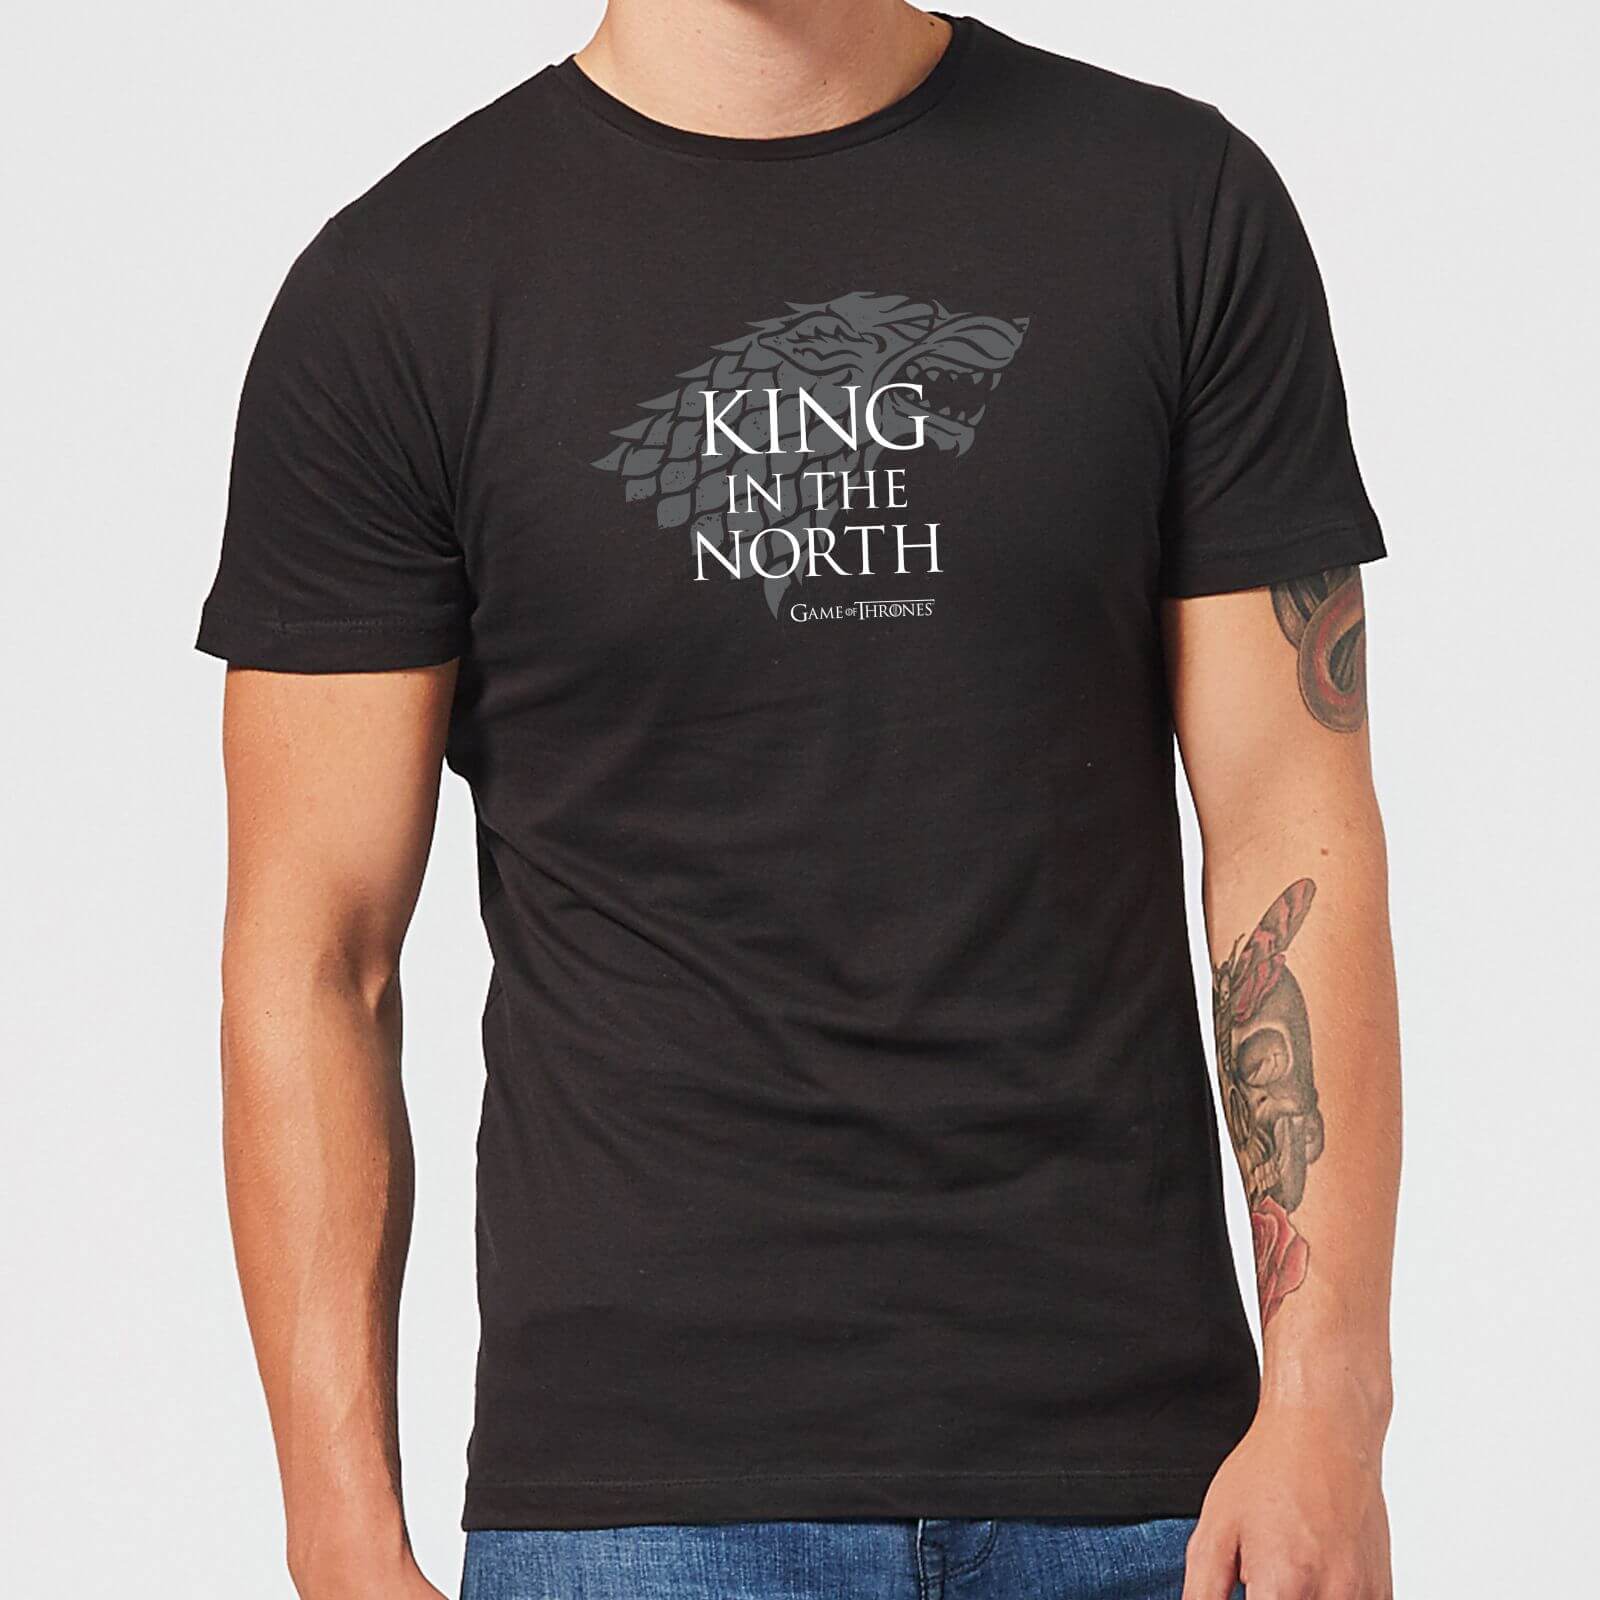 king in the north shirt